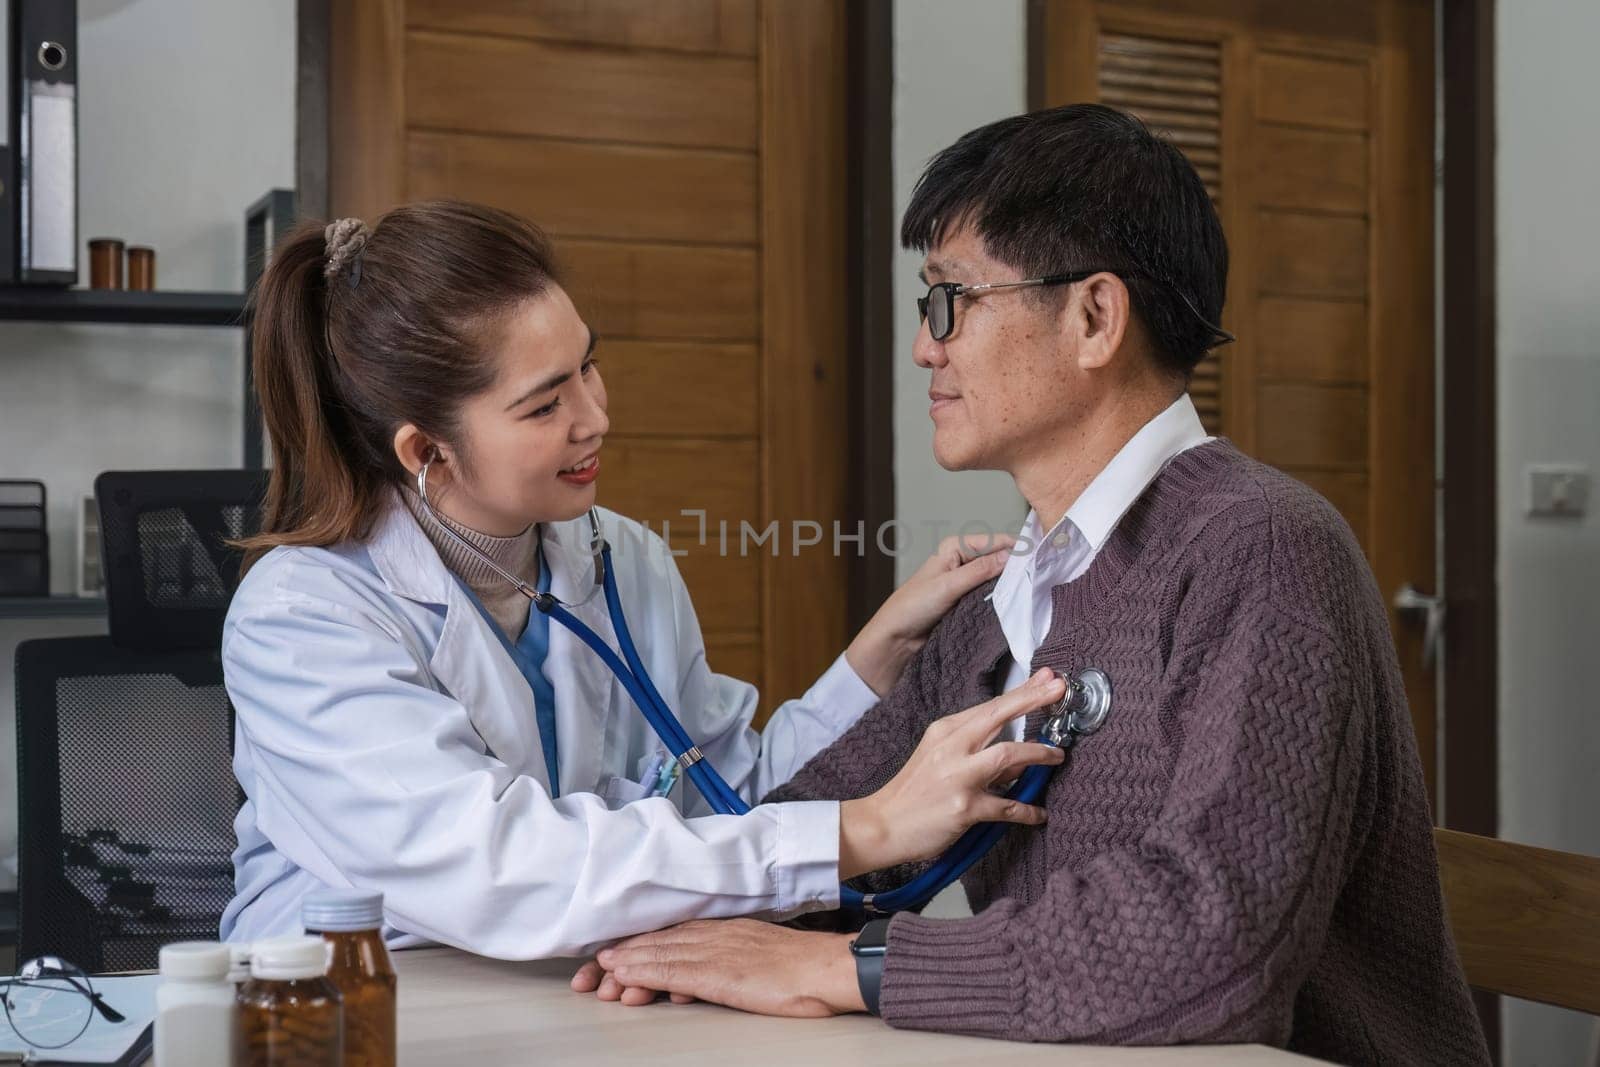 The female doctor in charge holds a stethoscope and listens to the patient. Doctor checking heartbeat examining retired elderly man at home Senior heart disease, health checkup concept health care by wichayada